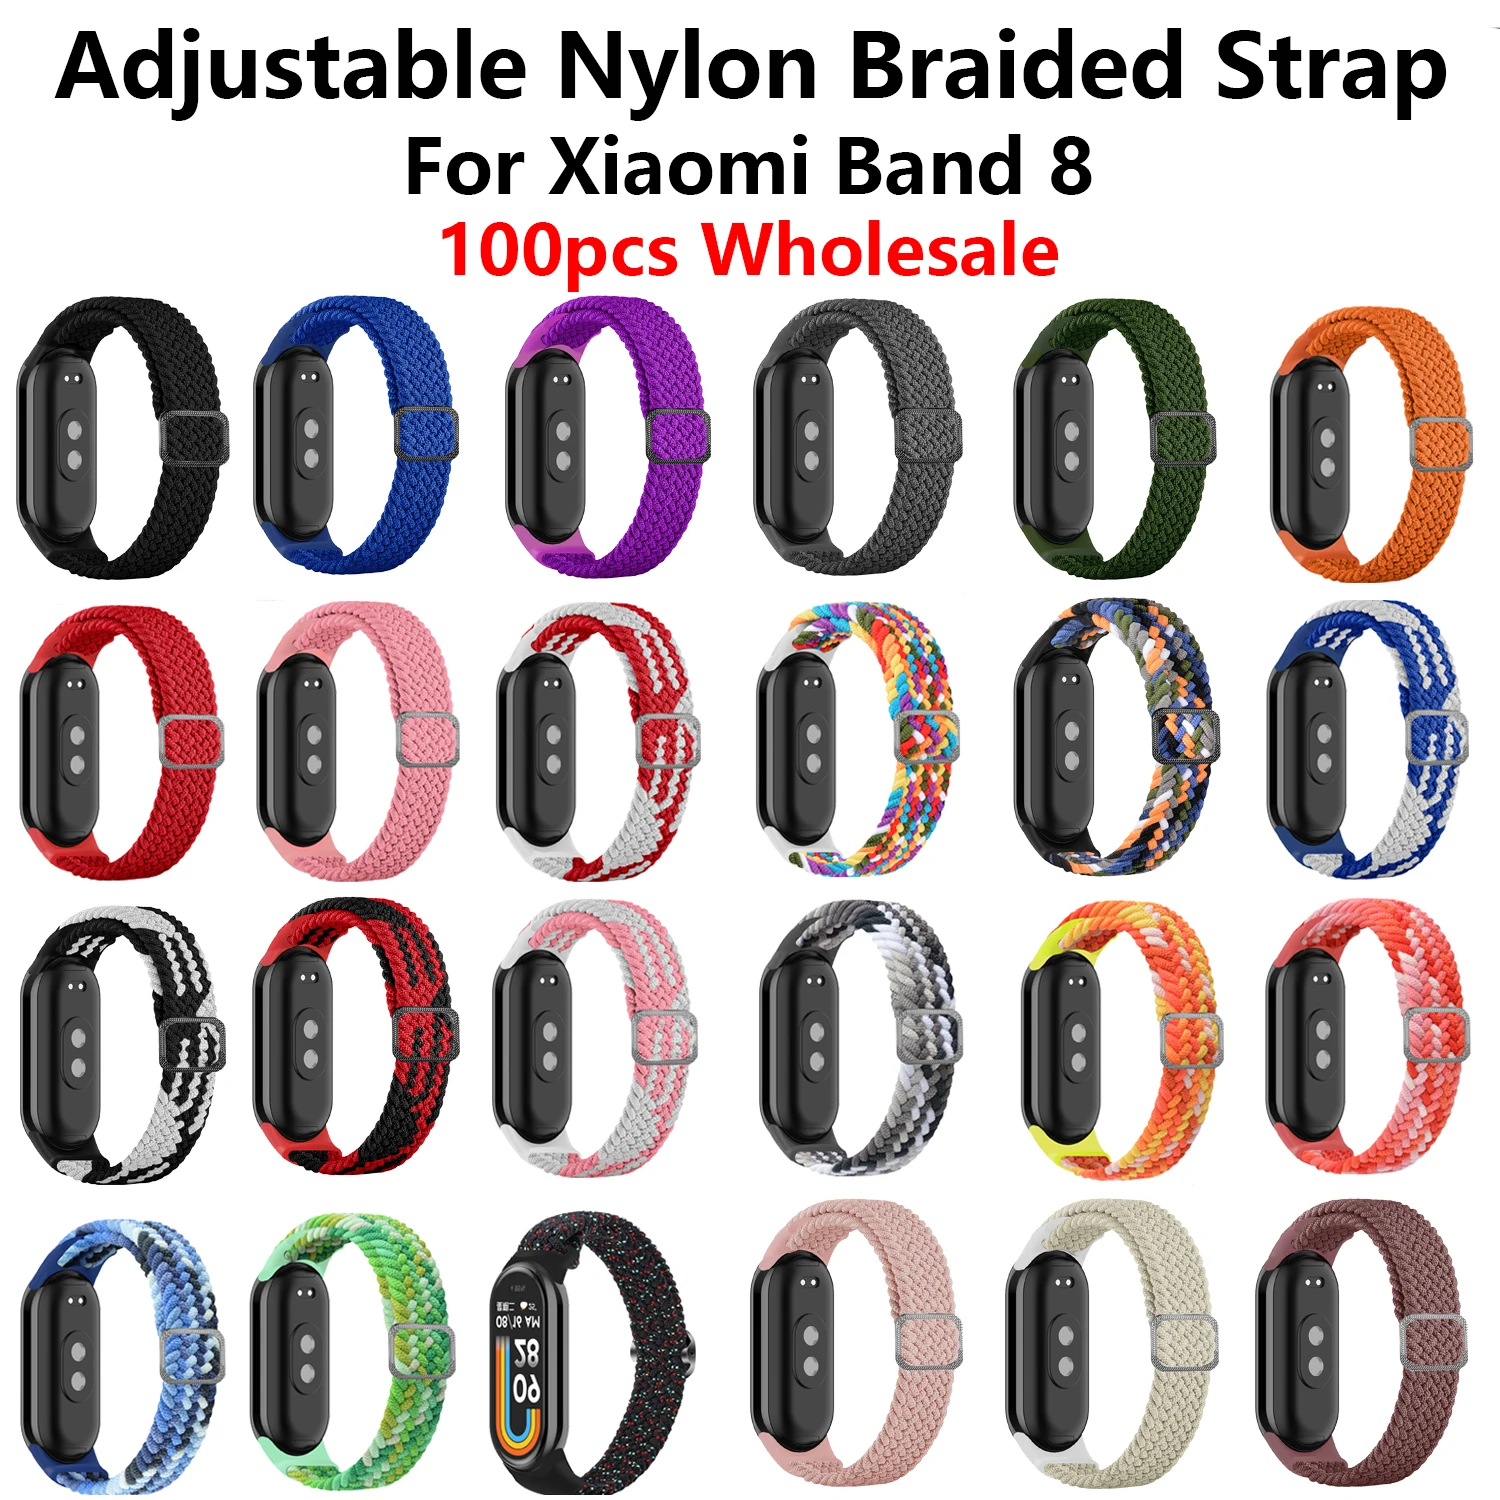 

100pcs Nylon Braided Strap For Xiaomi Mi Band 8 Adjustable Loop Bracelet Wristband Buckle For Mi Band 8 Replacement Watchband